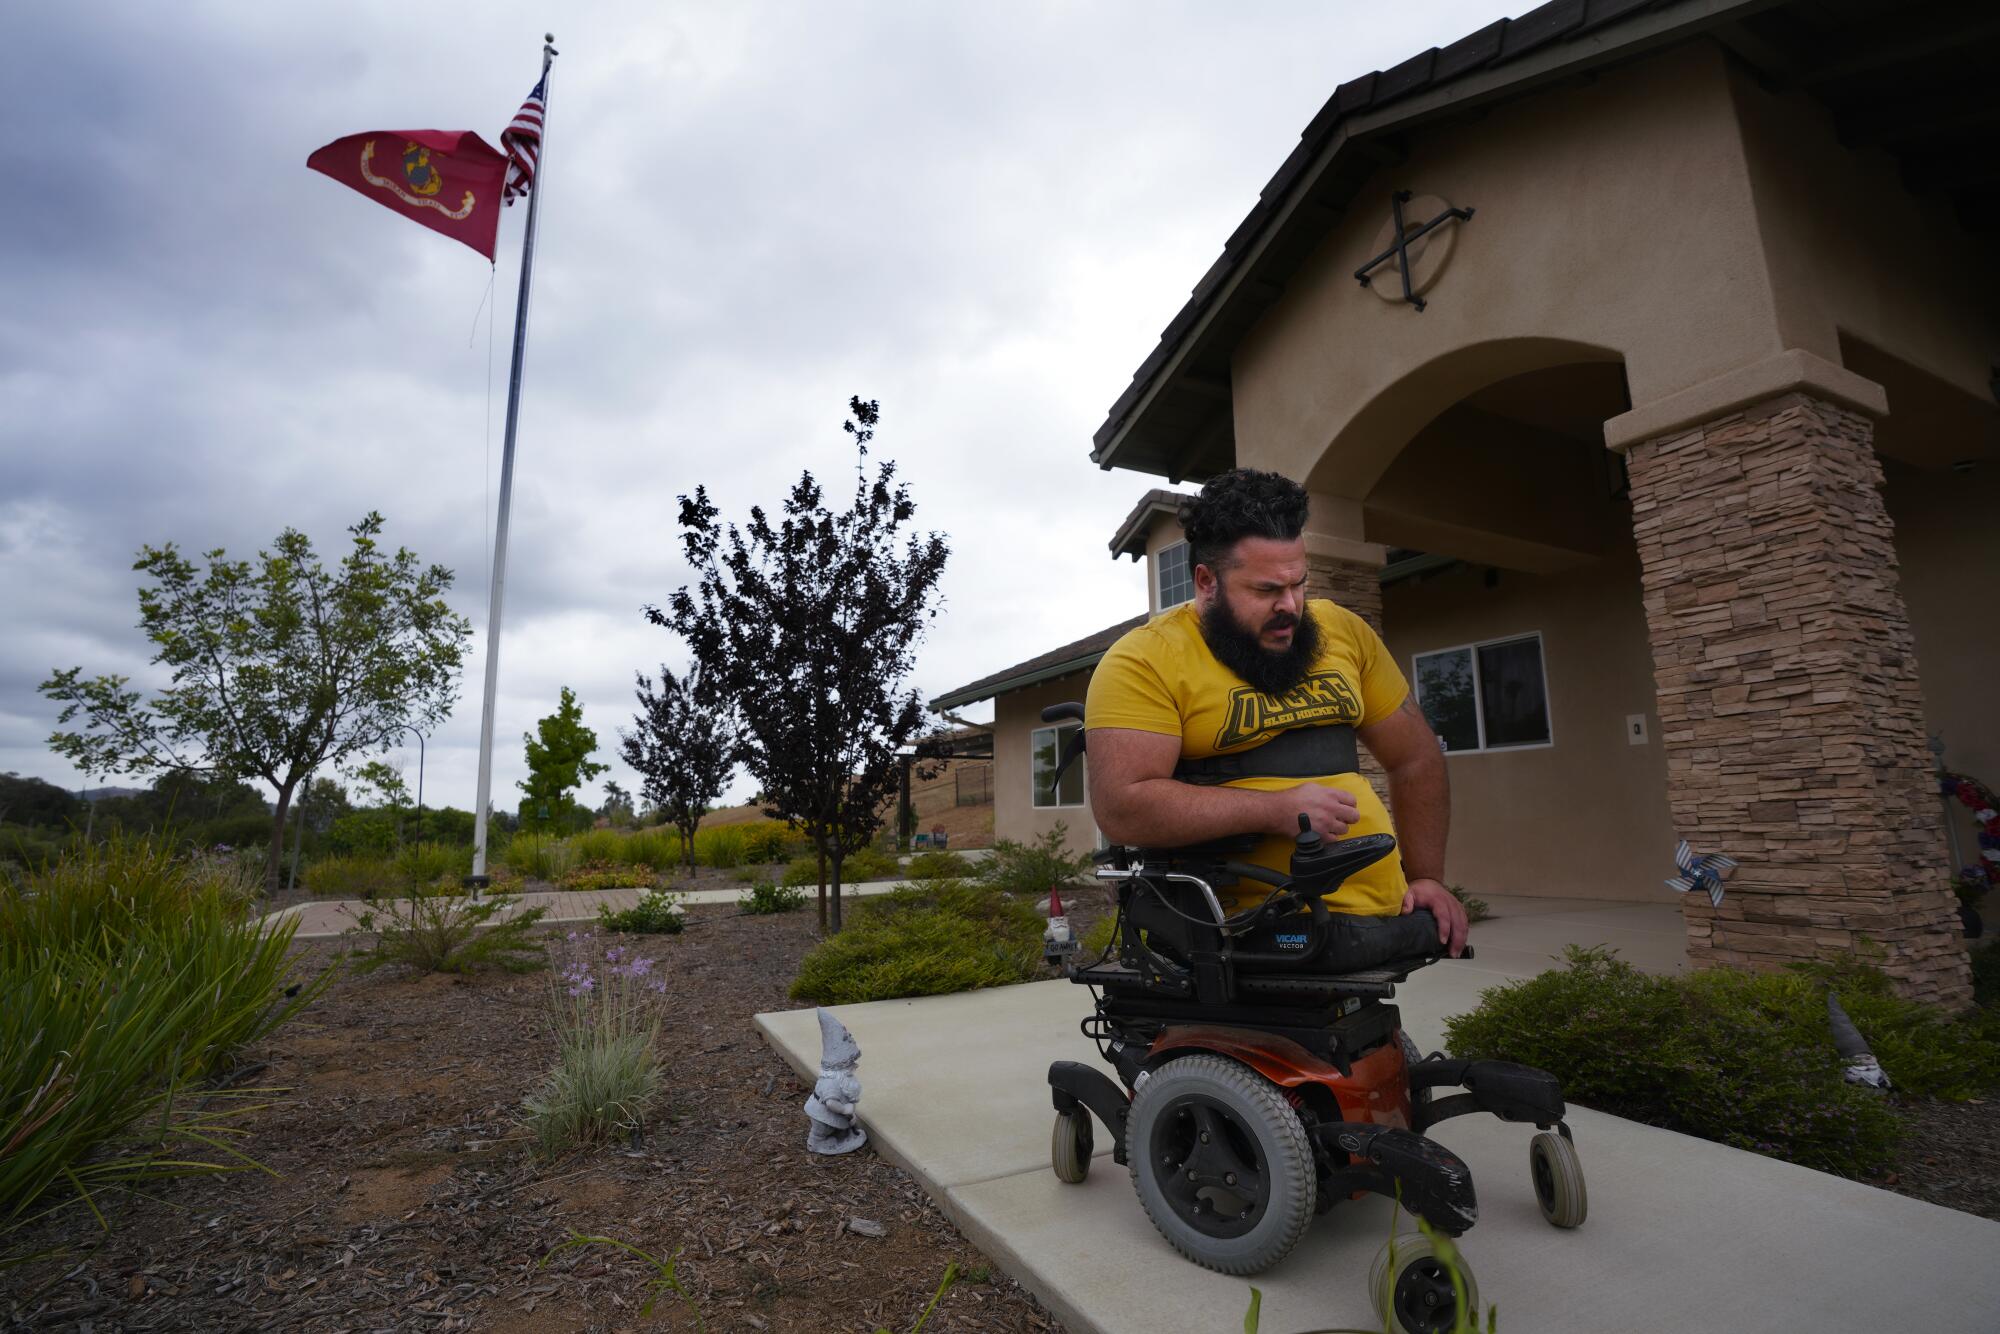  Jason Ross, who lost his legs while serving in Afghanistan, maneuvers in an automated wheelchair